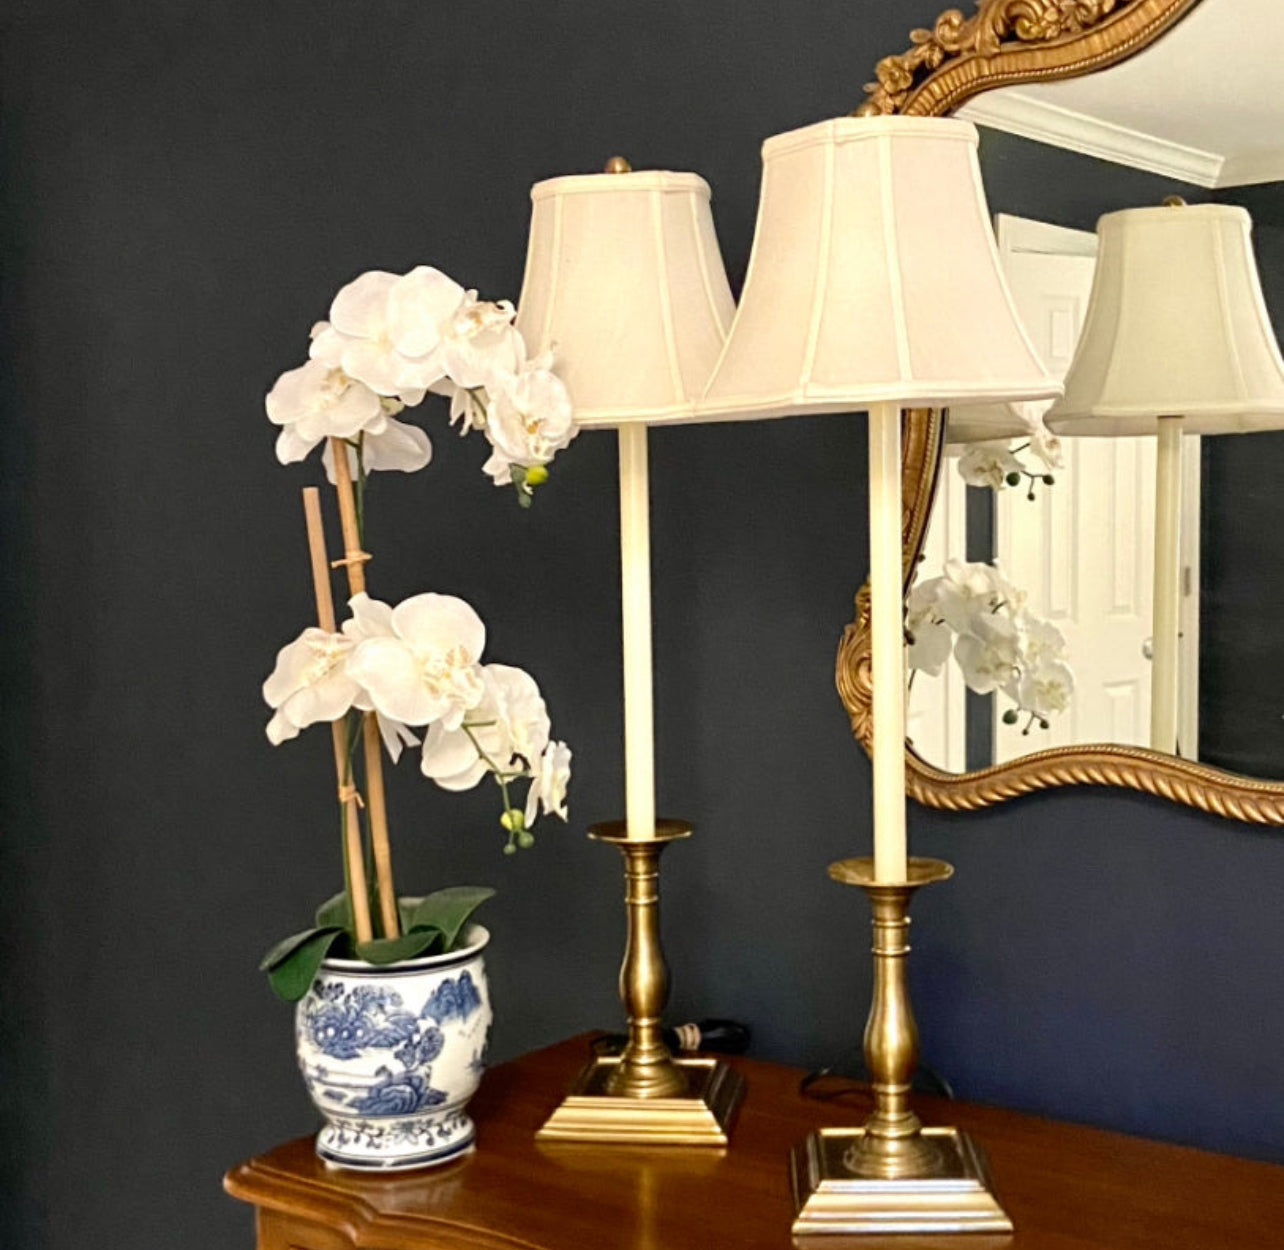 Pair of statuesque  brass candlestick style lamps